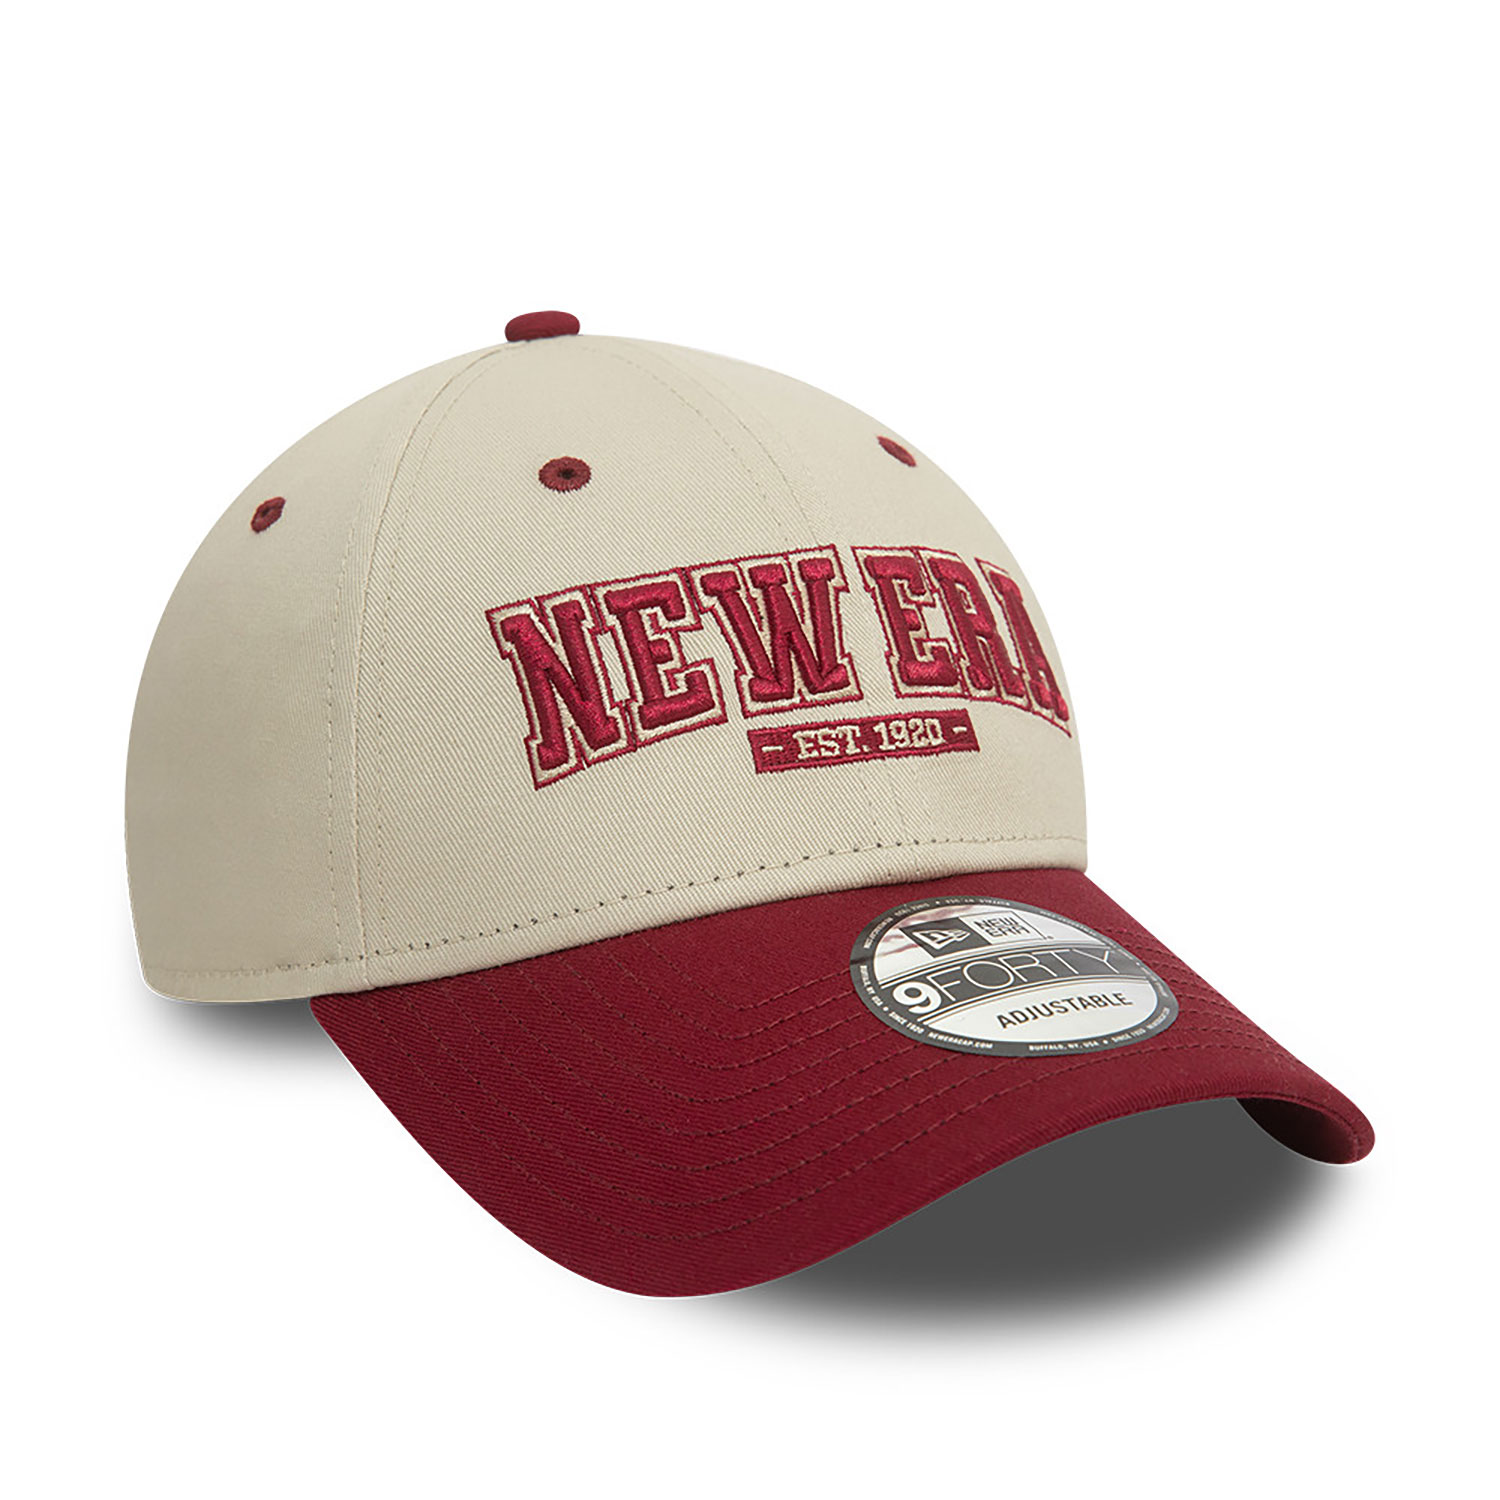 New Era Script Contrast Stone and Red 9FORTY Adjustable Cap